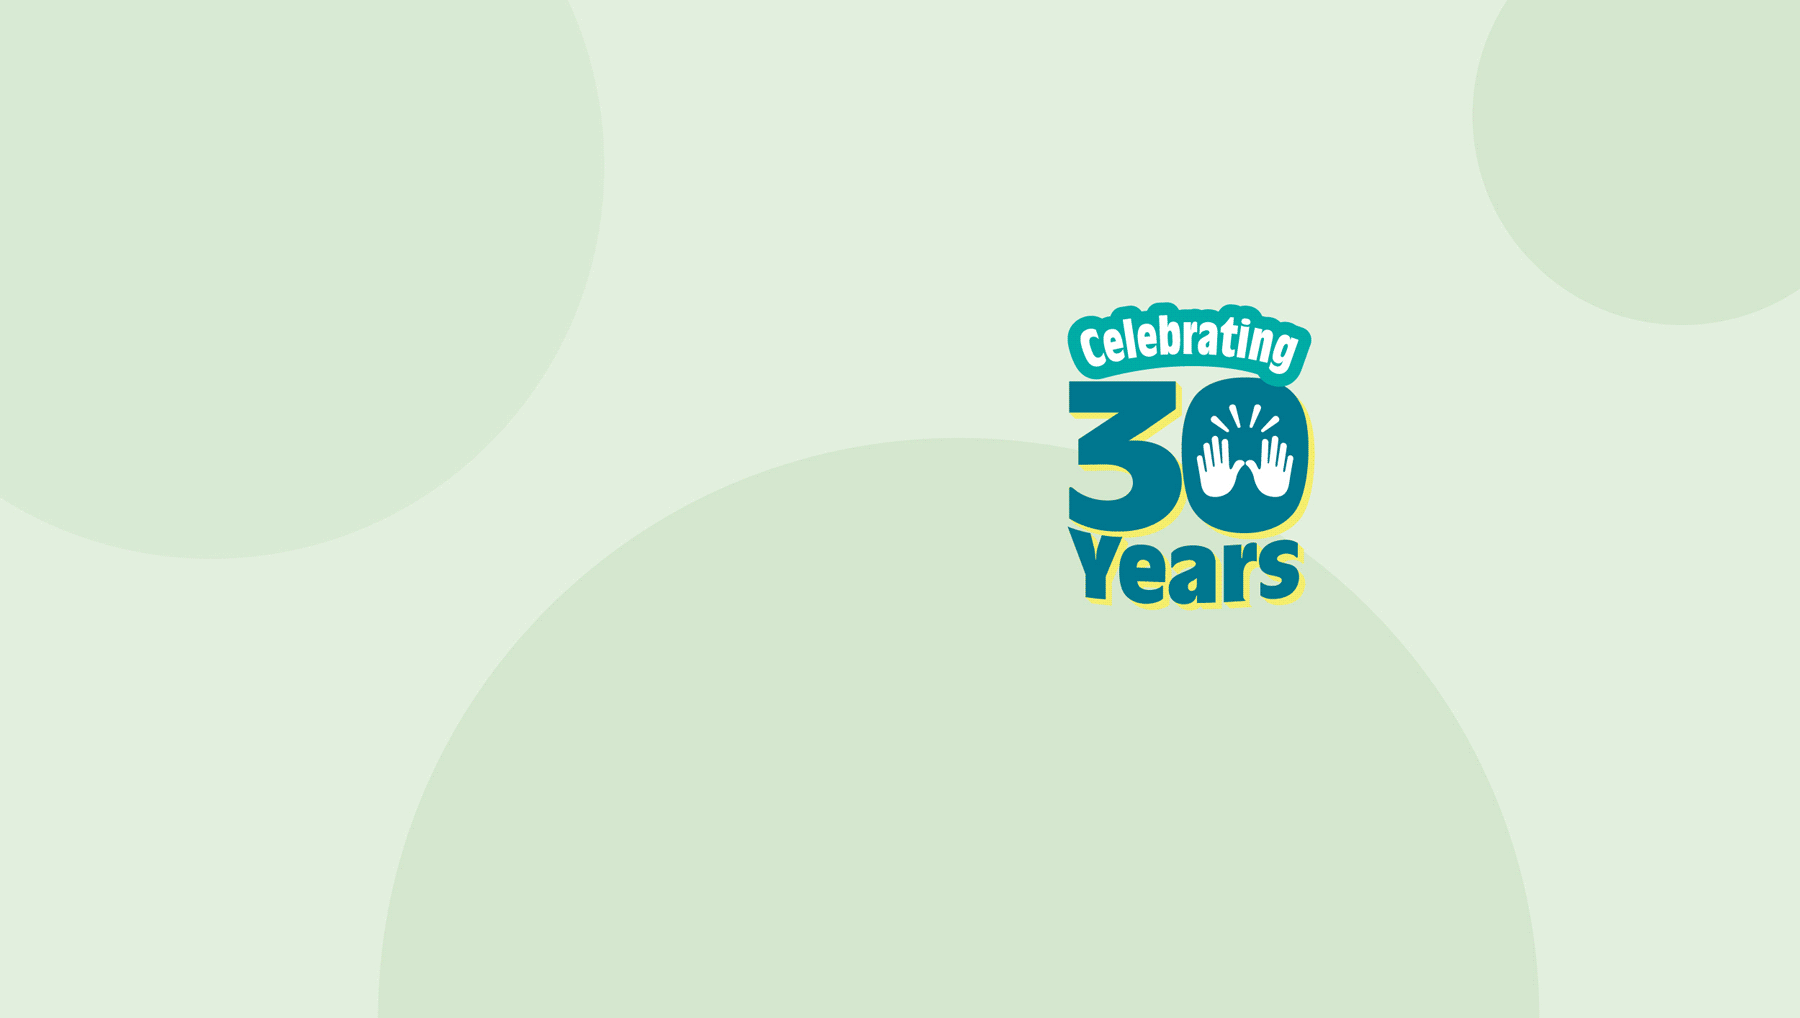 Celebrating 30 Years of our natural deodorant.  Features our original crystal stick deodorant from 1993 and our product range in 2023.